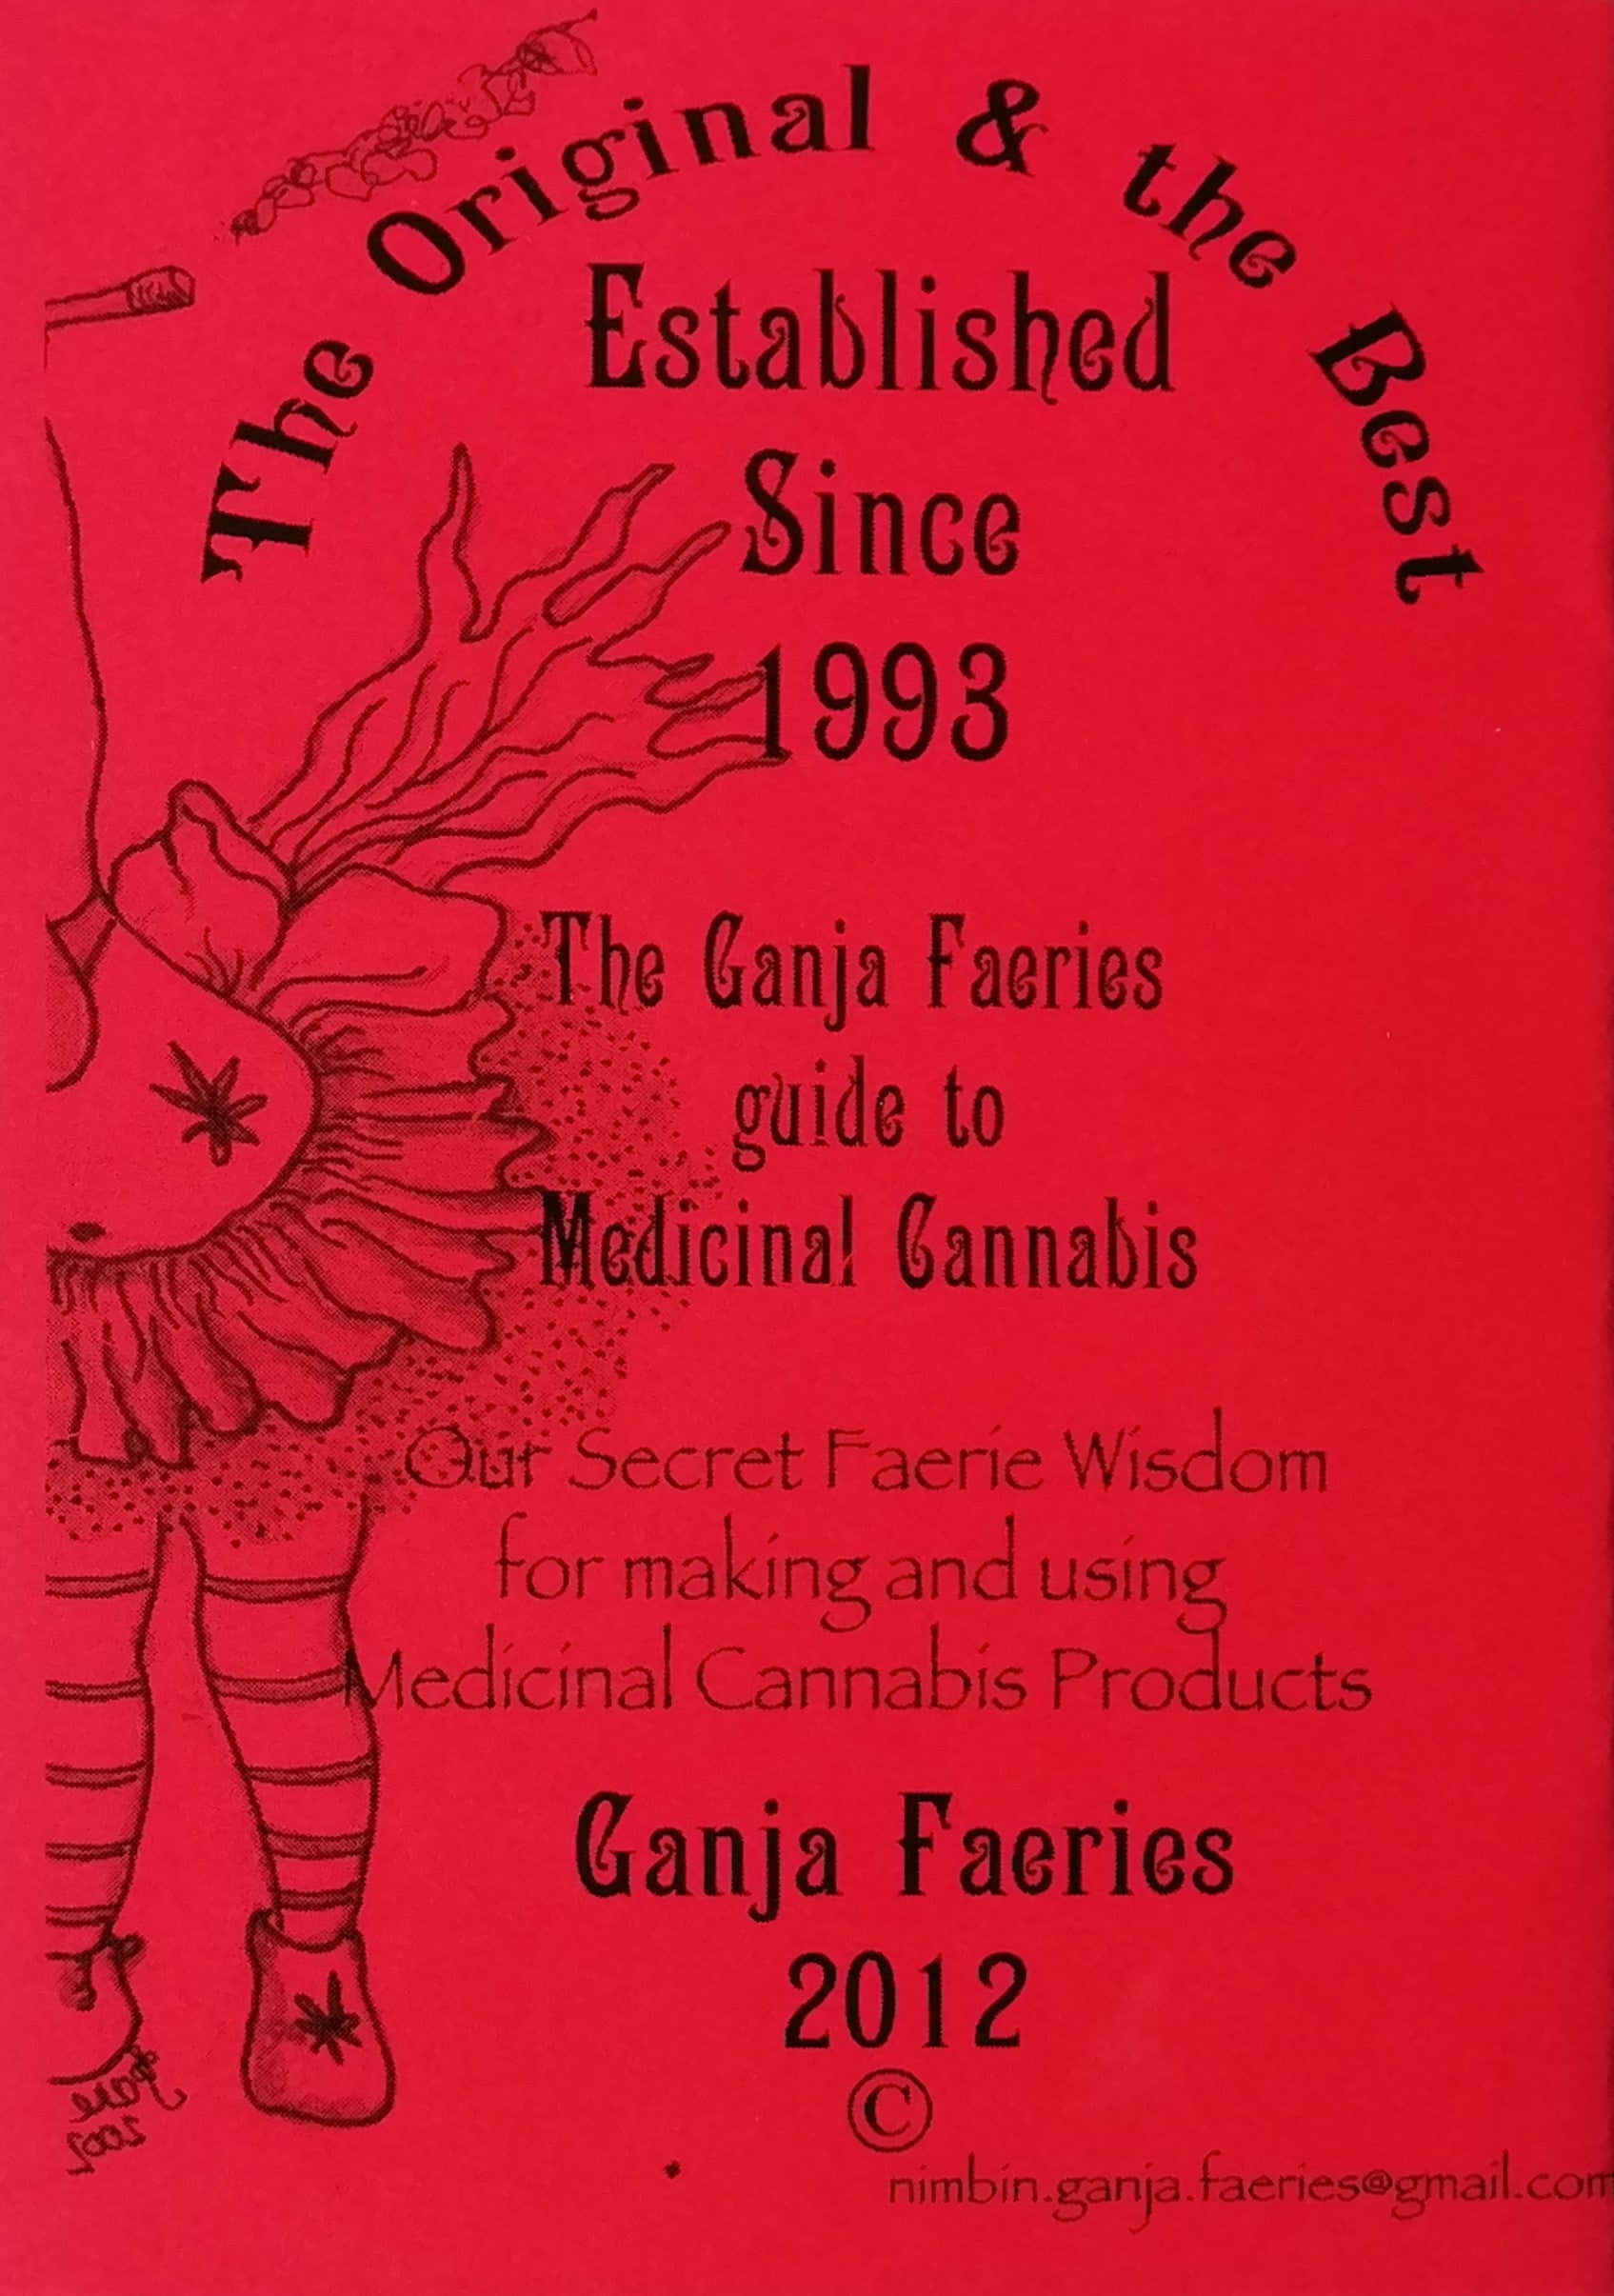 Little Faerie Book for Medicinal Cannabis by The Ganja Faeries